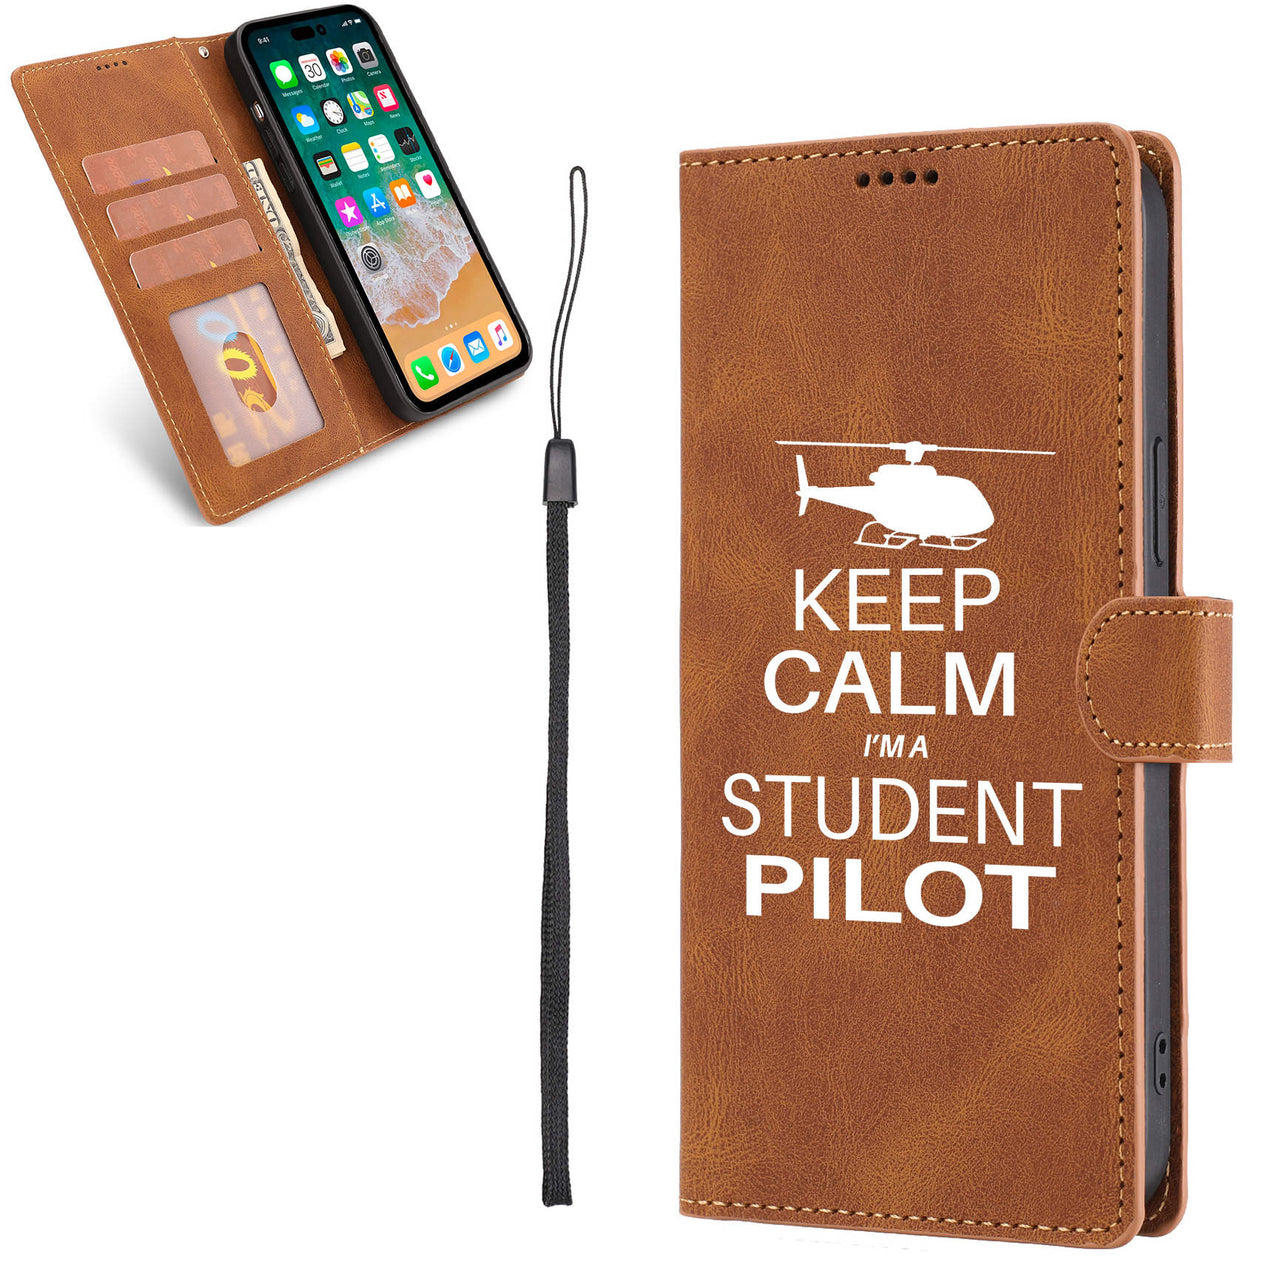 Student Pilot (Helicopter) Designed Leather iPhone Cases